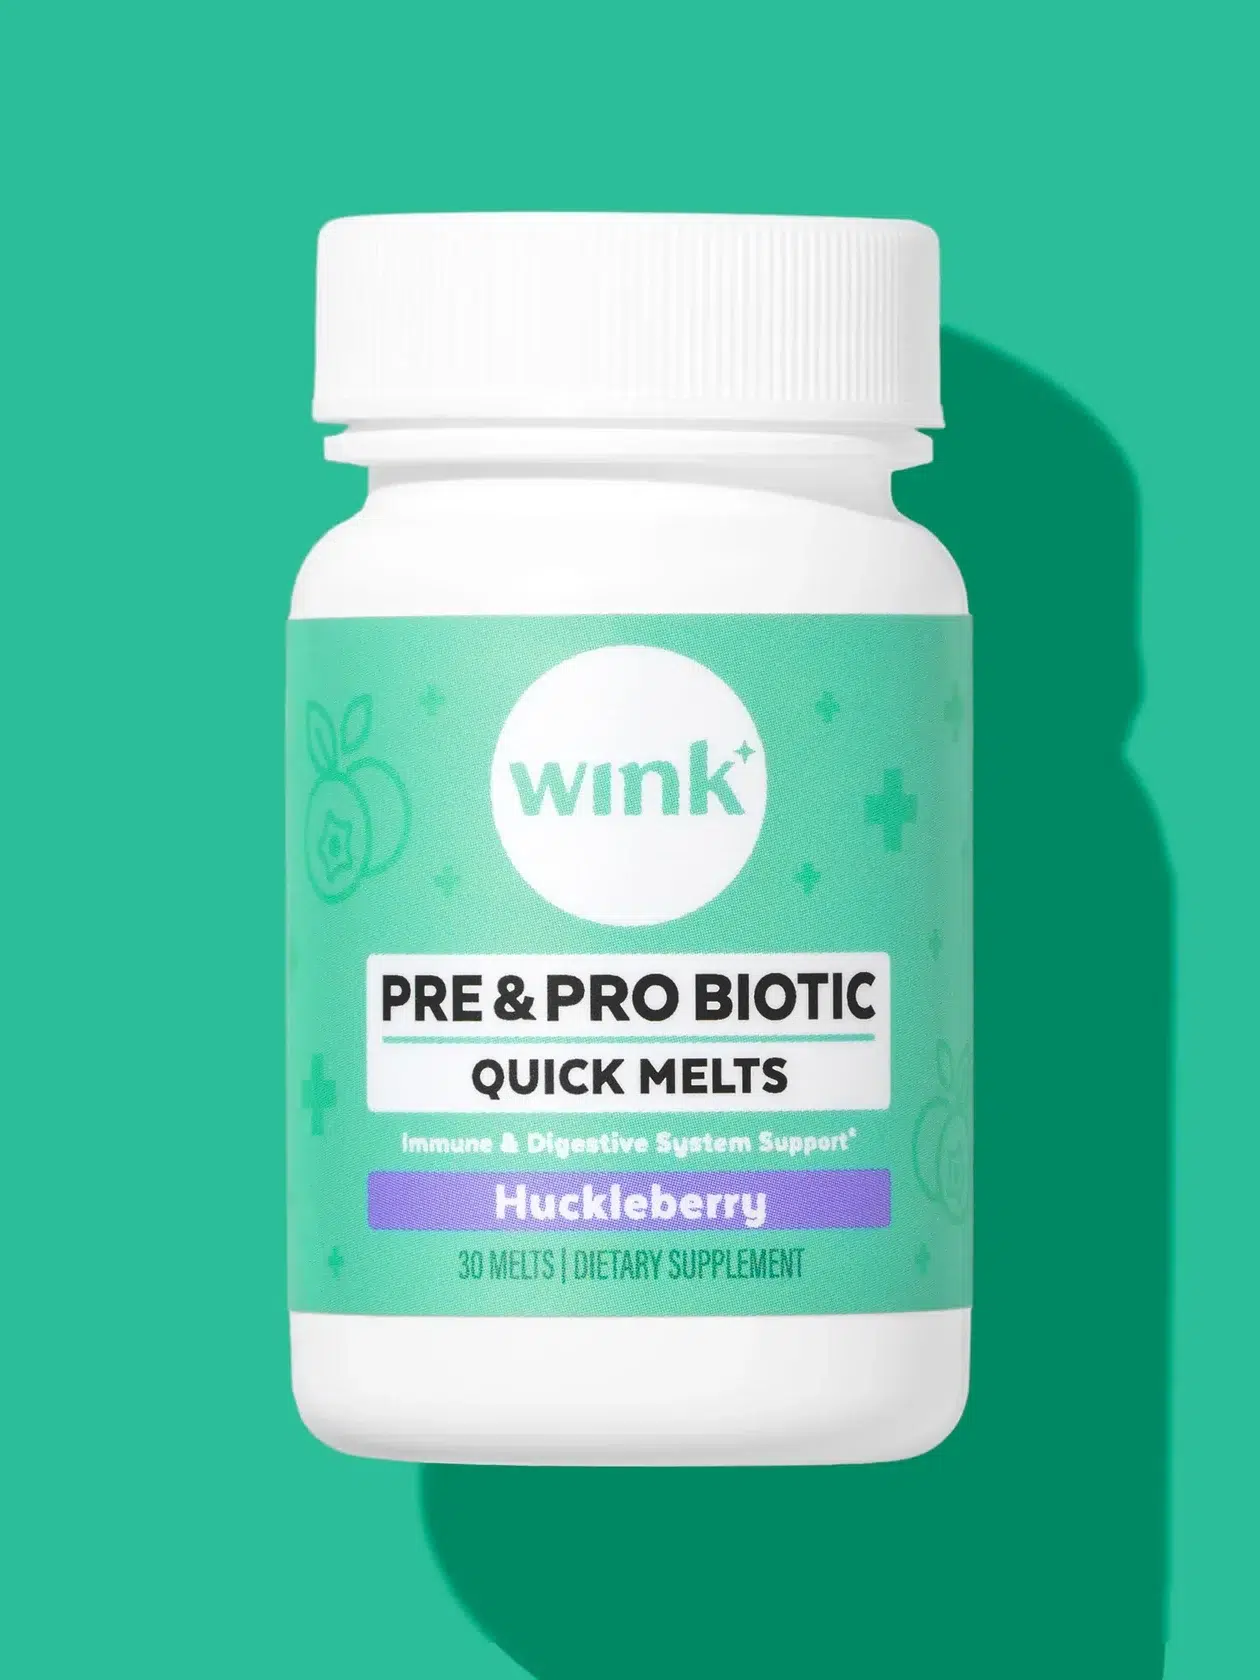 A bottle of wink pre & pro biotic quick melts in huckleberry flavor against a green background.